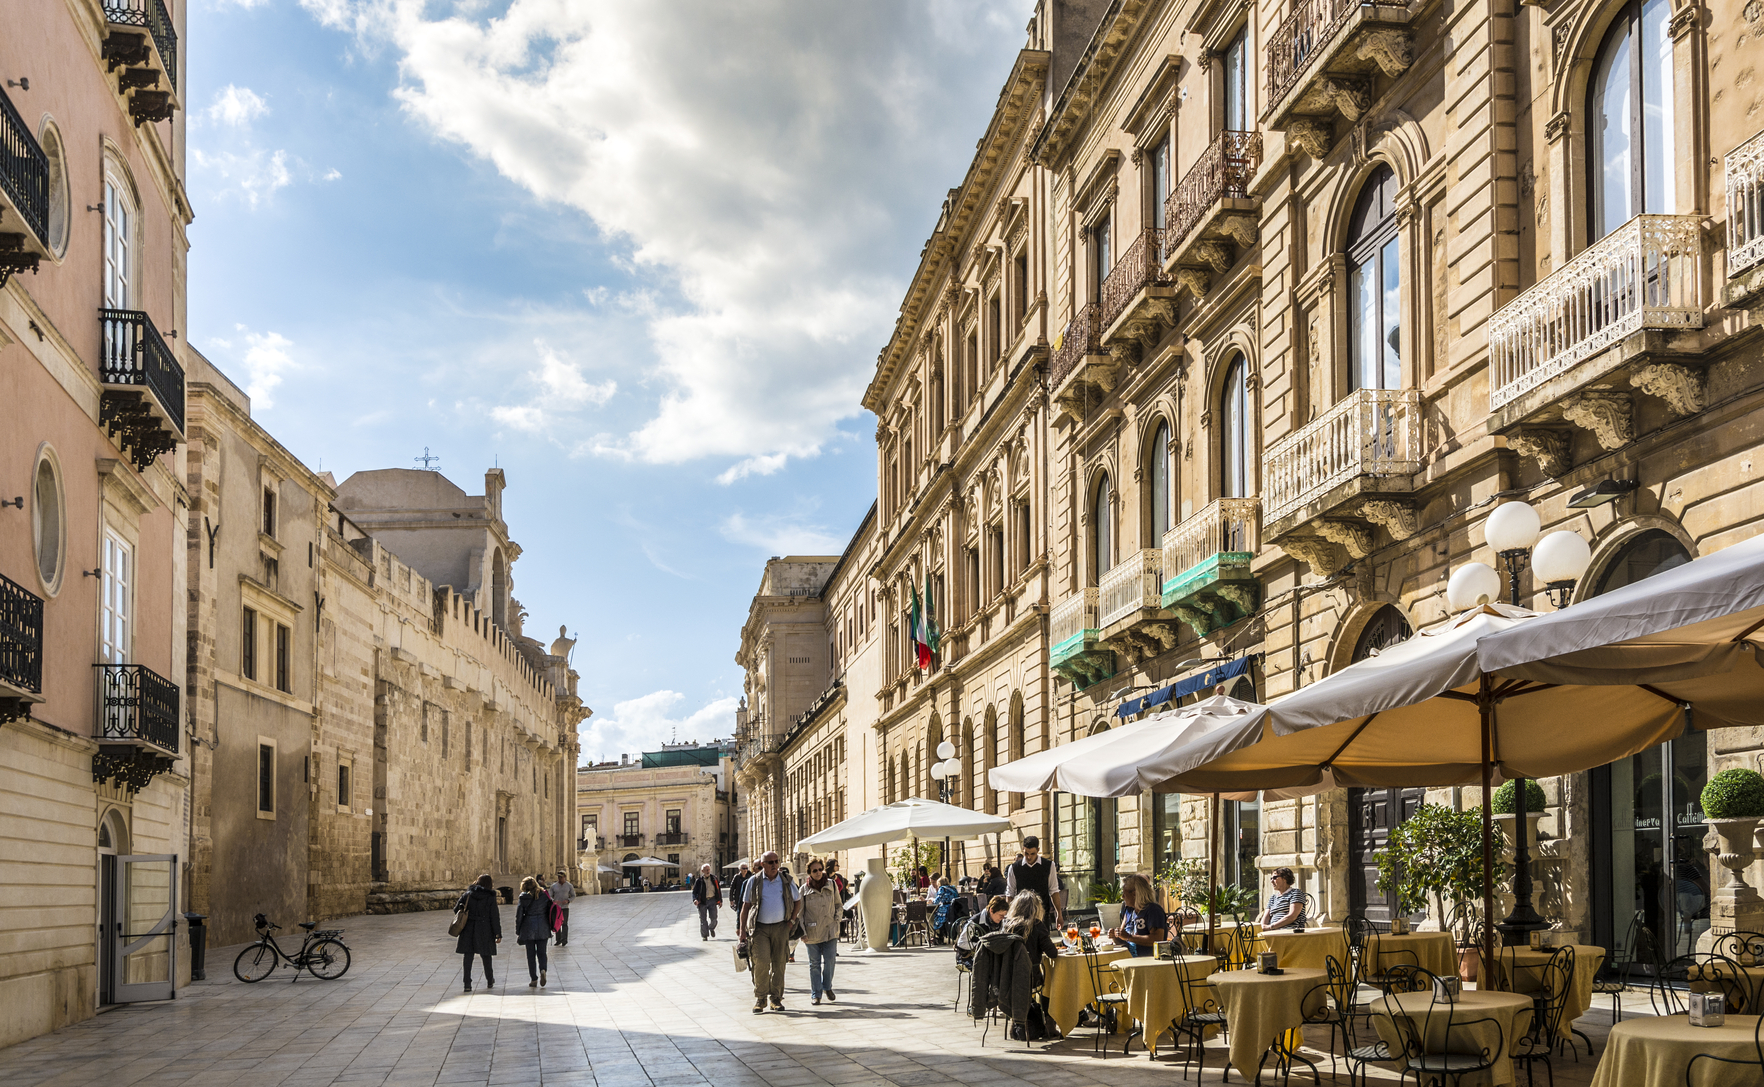 Syracuse, Italy - March 17, 2016: People of various ages walking and sitting in the centre of Syracuse (Siracusa in Italian), a major town and tourist destination in Sicily, Italy. There are cafes on the right and the Cathedral on the left. Daytime.